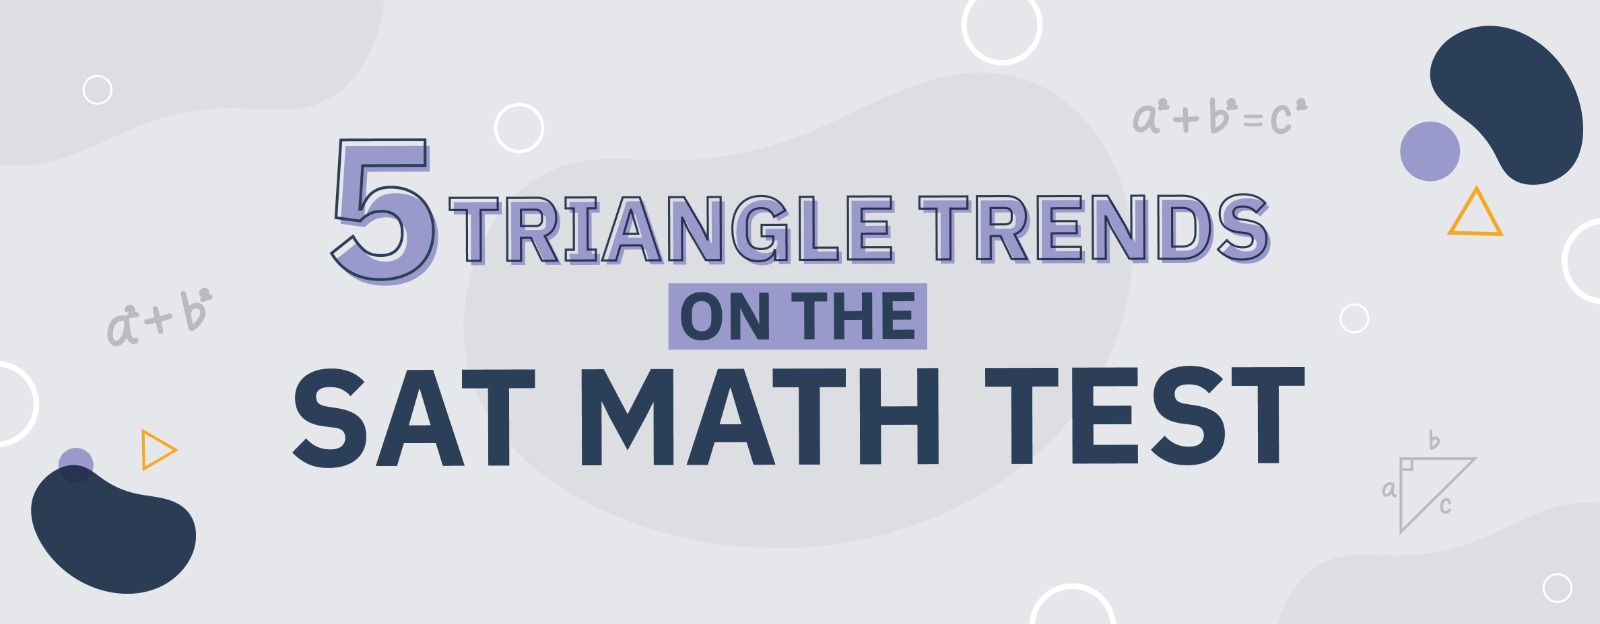 5 Triangle Trends on the SAT Math Test